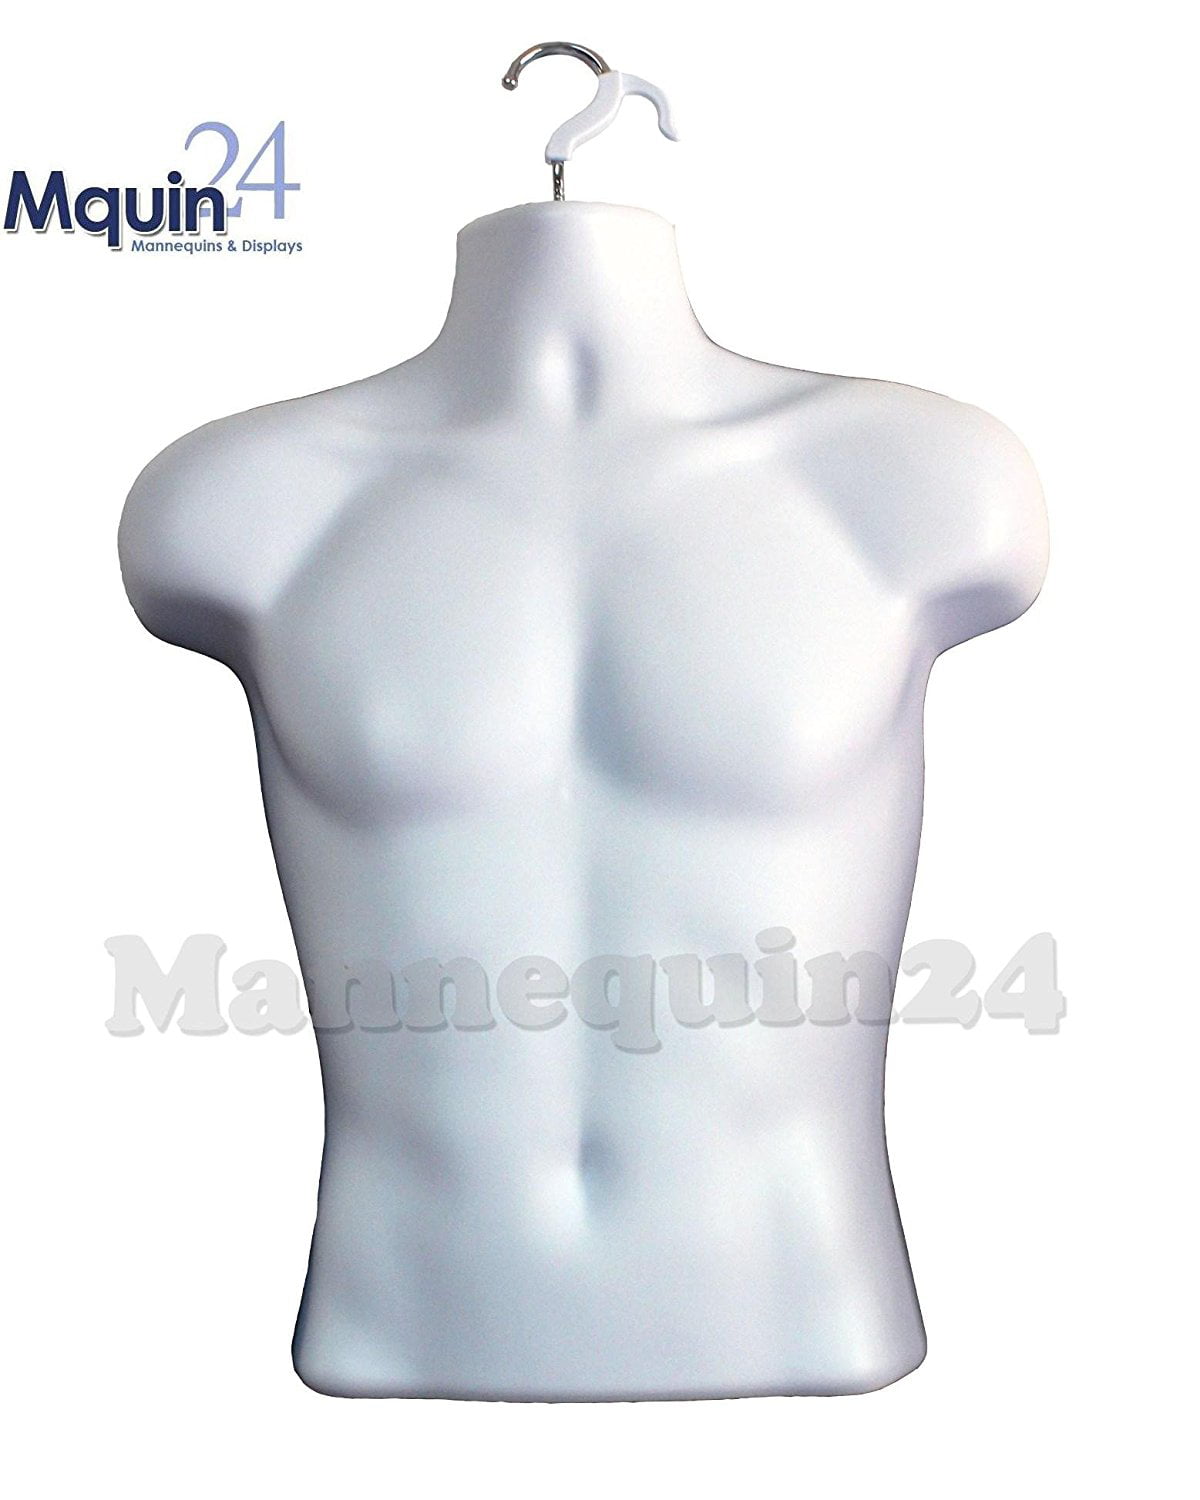 The Competitive Store Female Dress with Metal Base Body Mannequin Form Hips Long White Small/Medium 